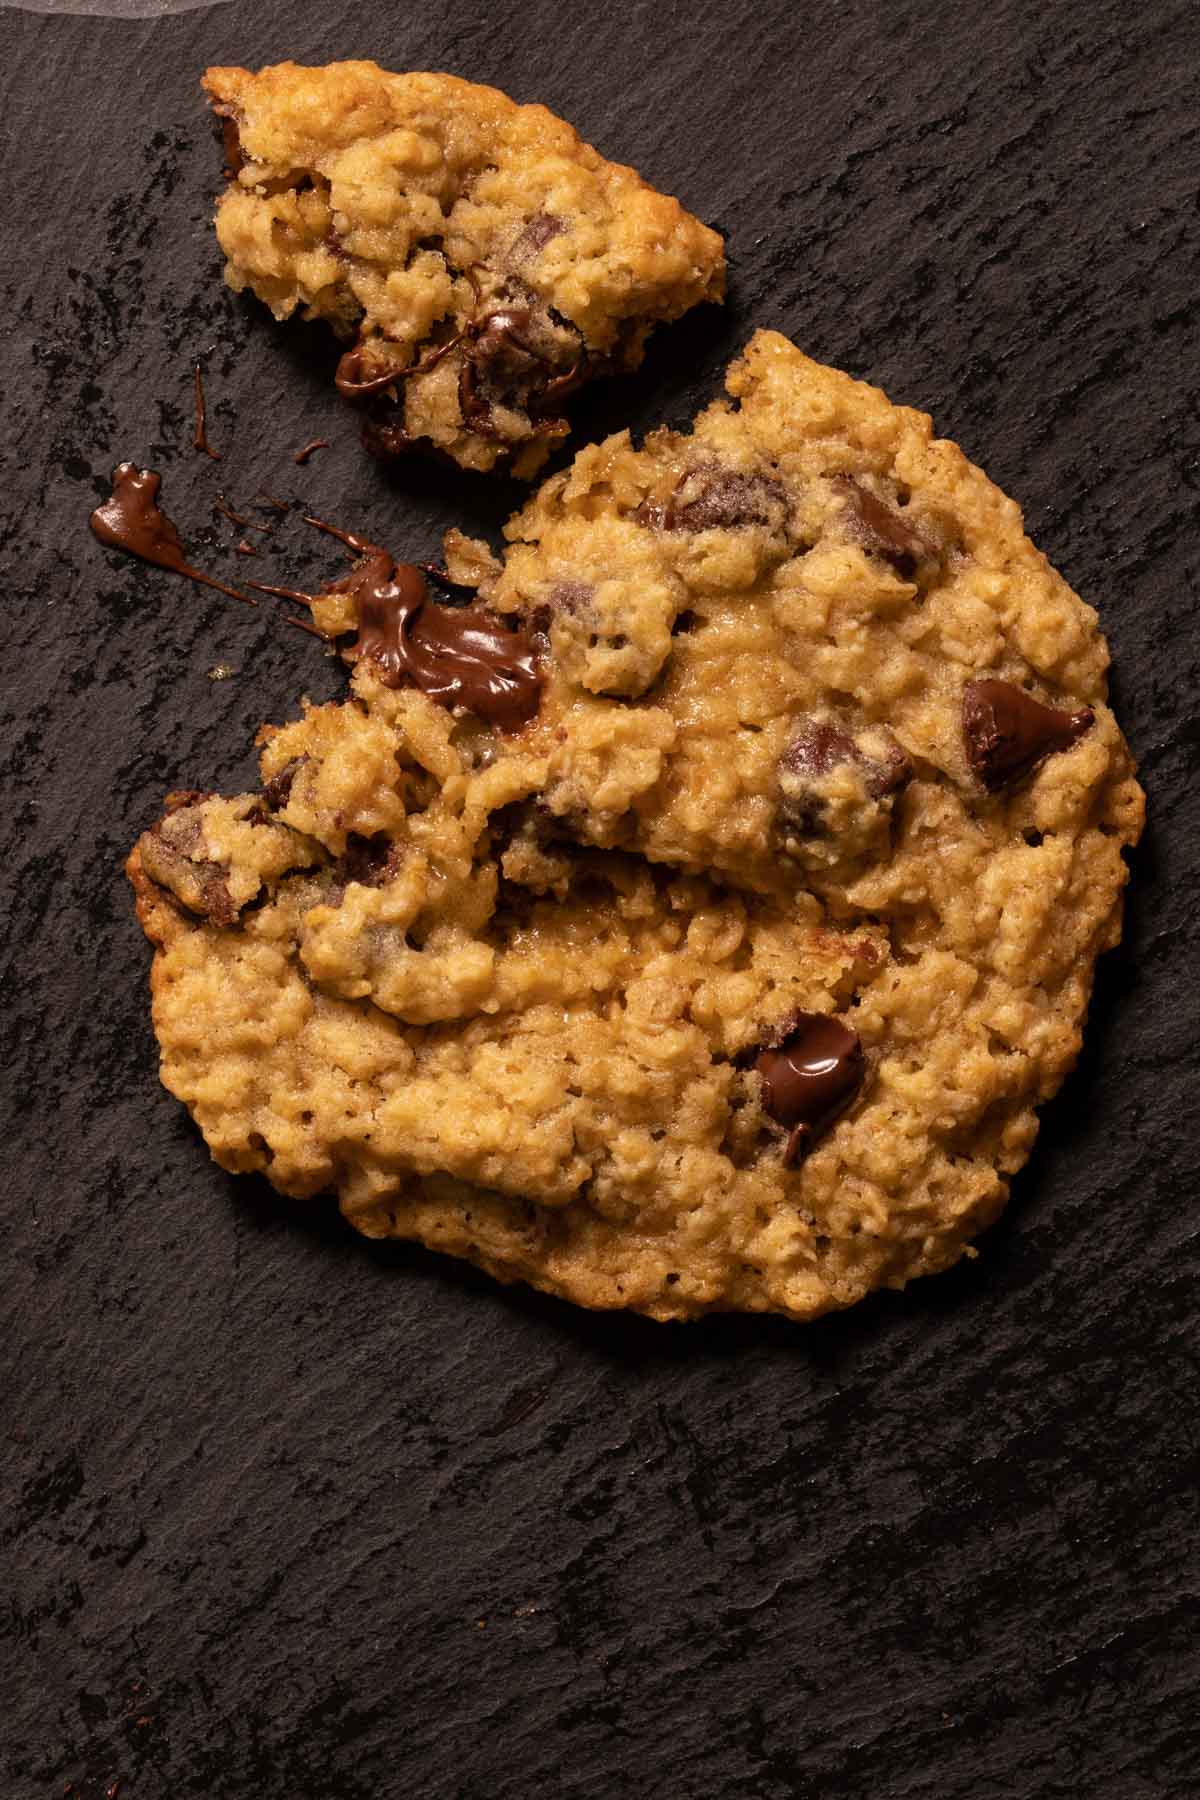 An oatmeal chocolate chip cookie with a bite taken out of it